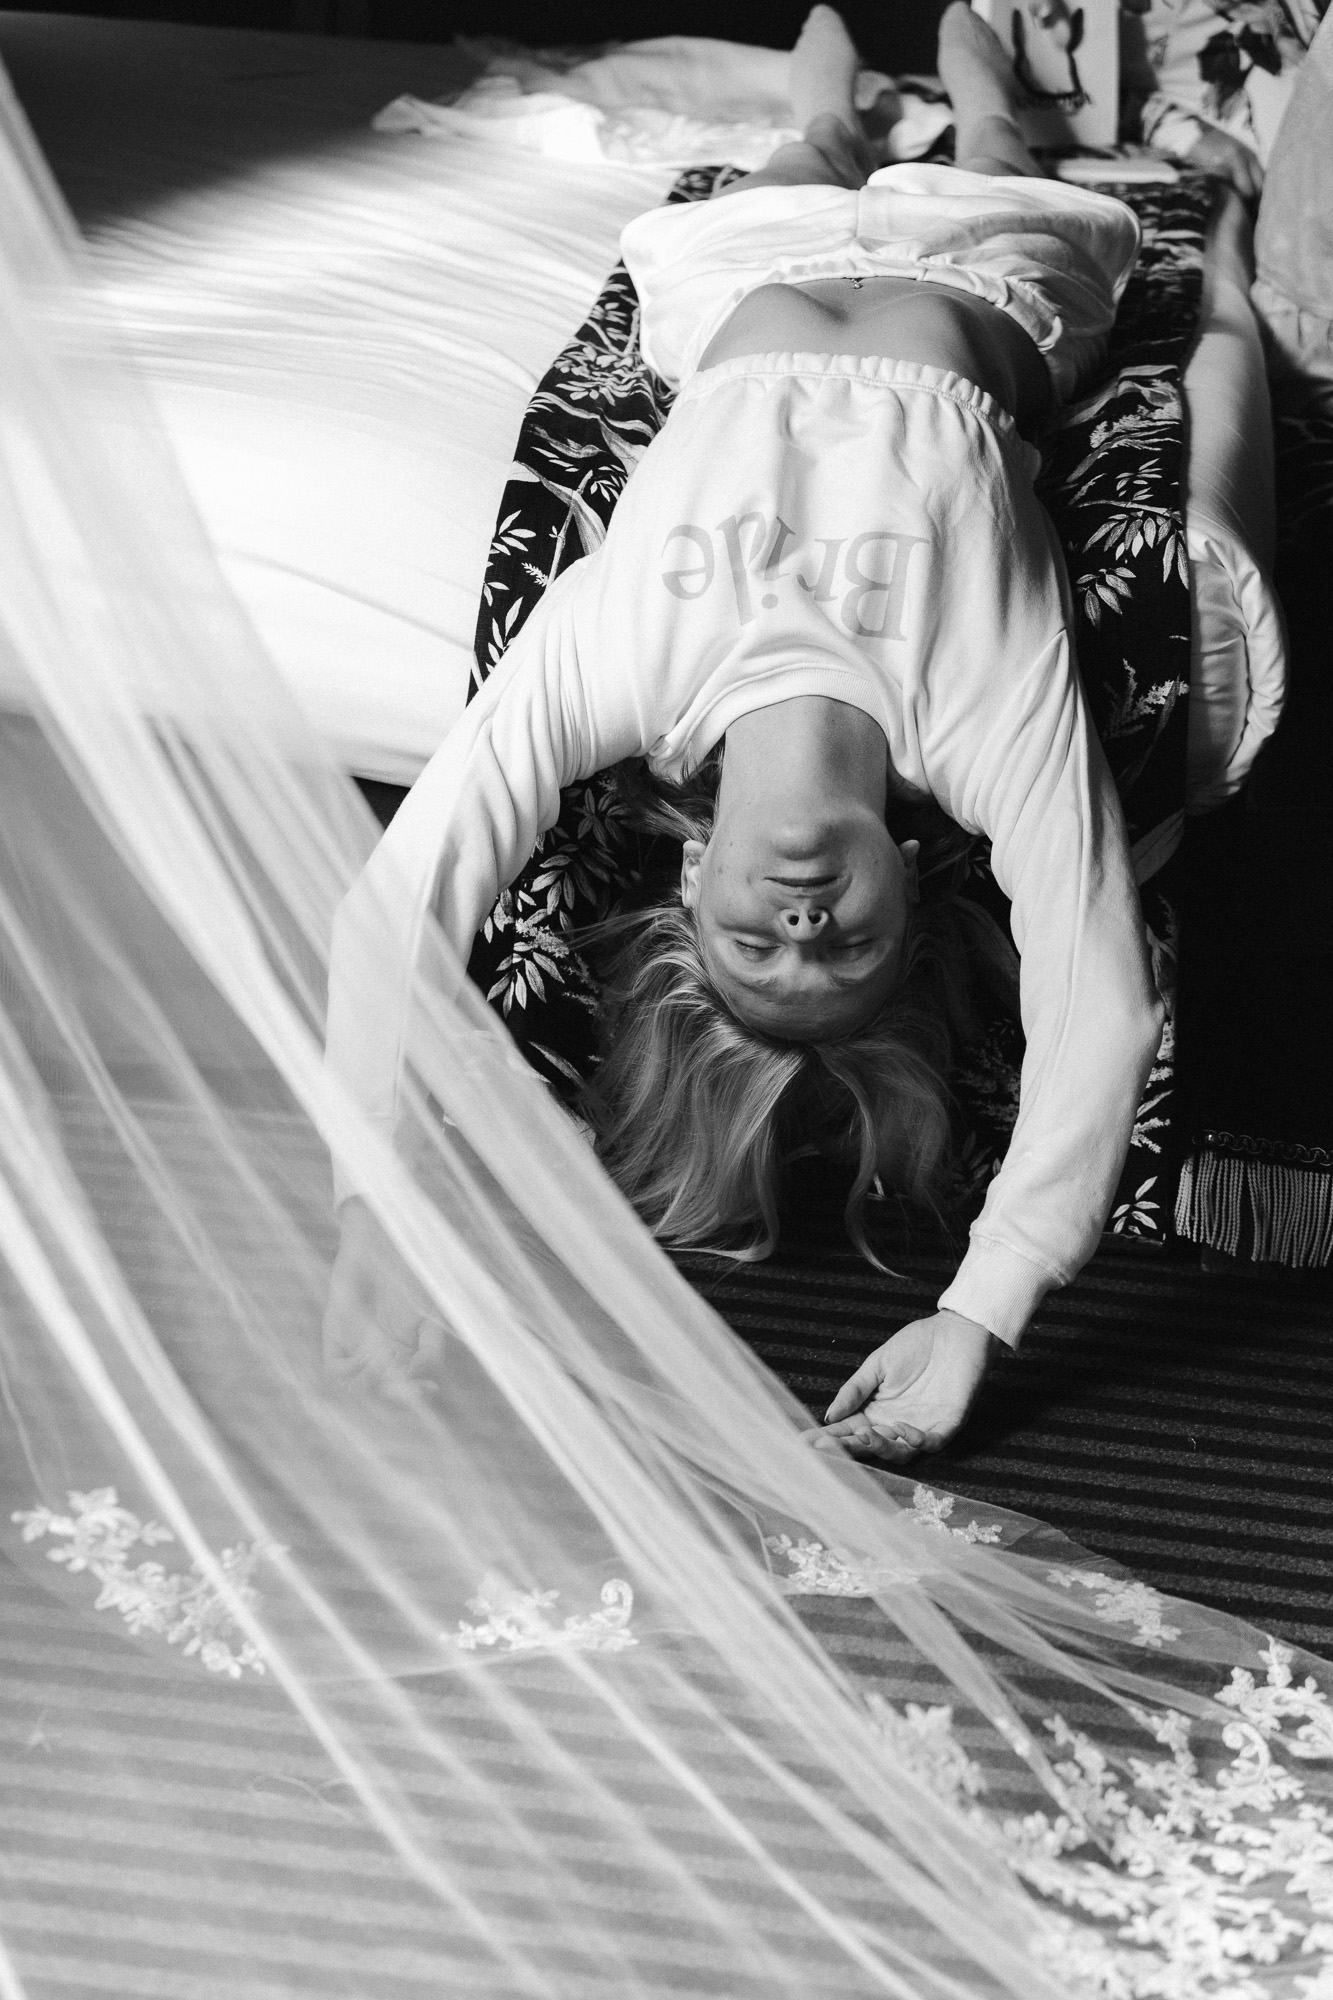 Paris wedding photographer: The bride tries to stretch a little before the start of her wedding at Hotel Particulier de Montmartre